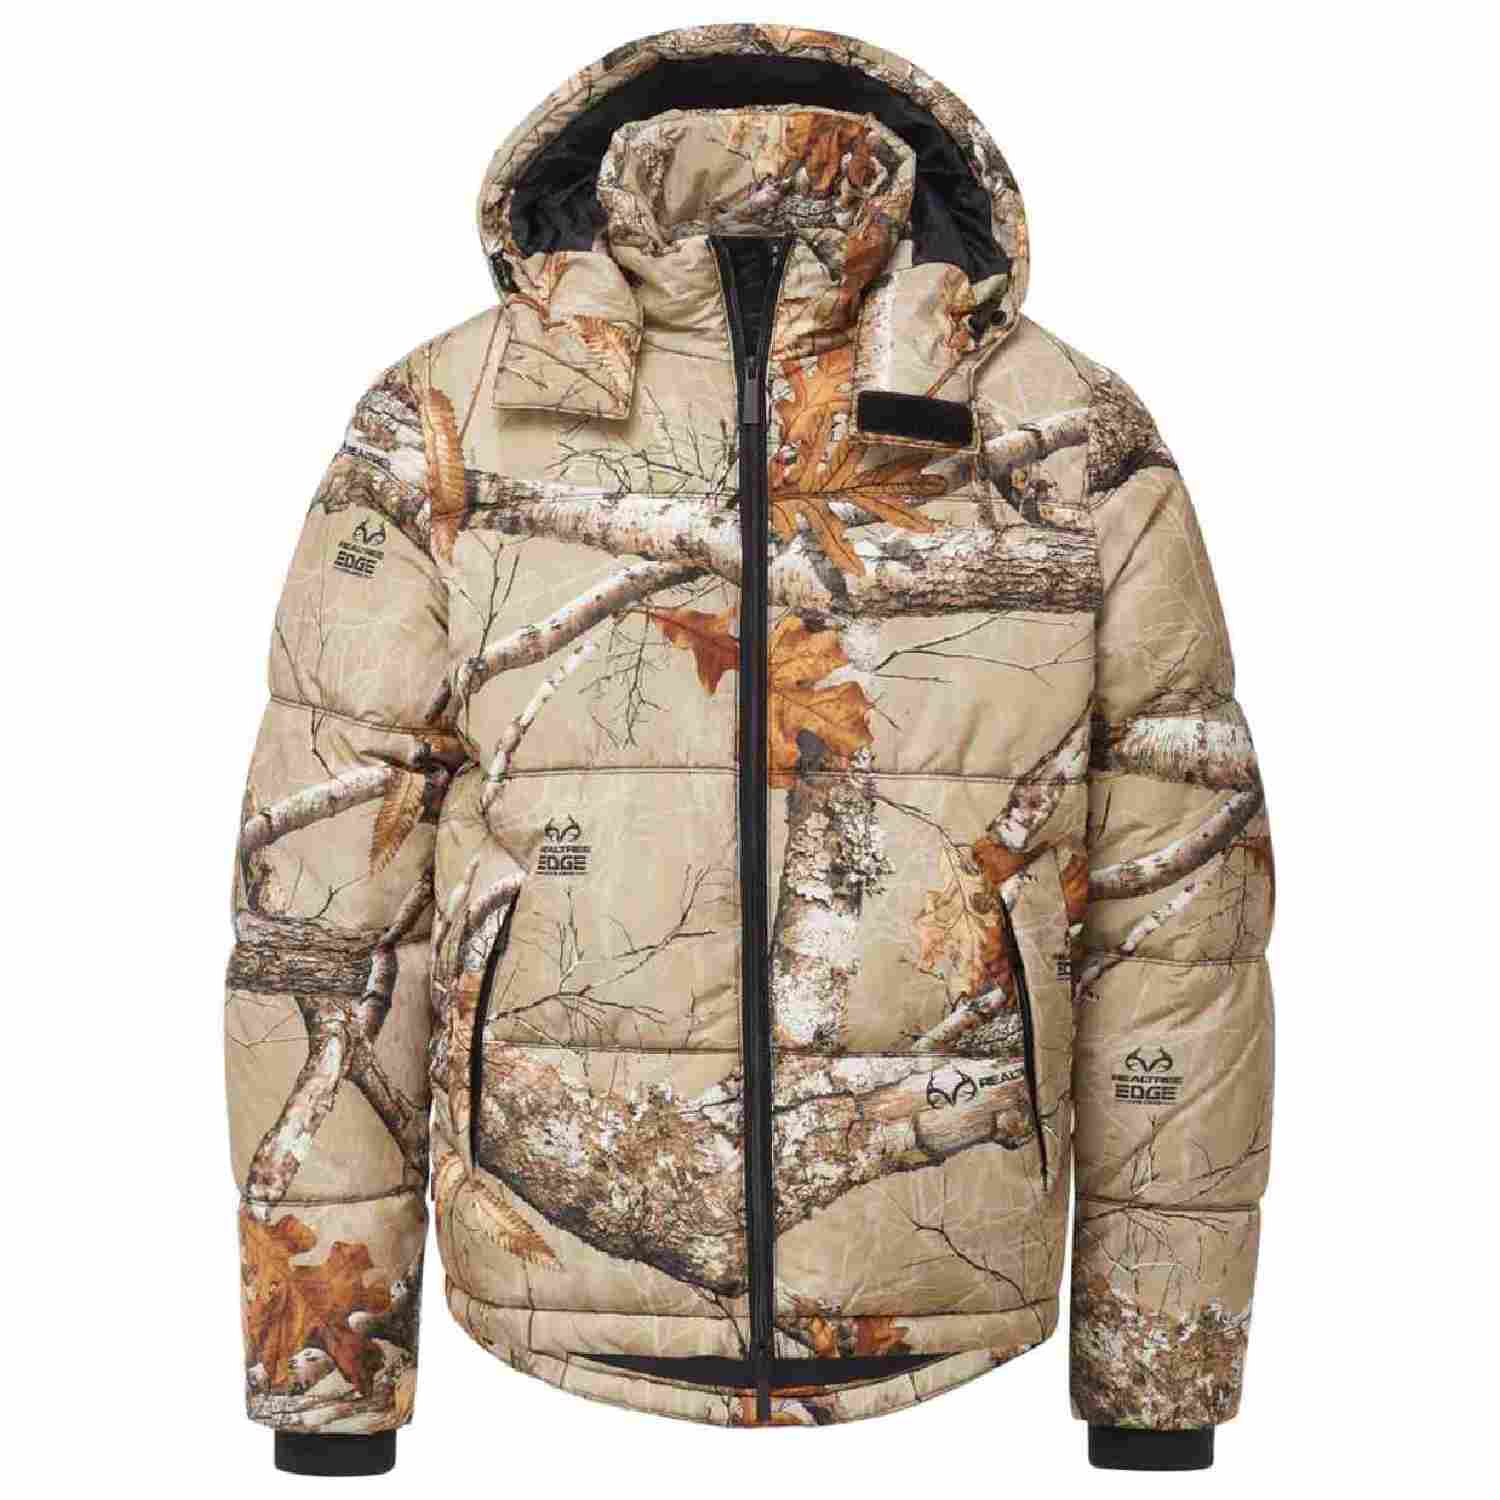 The Very Warm Puffer Jacket Camo Polyfilled - KCDC Skateshop